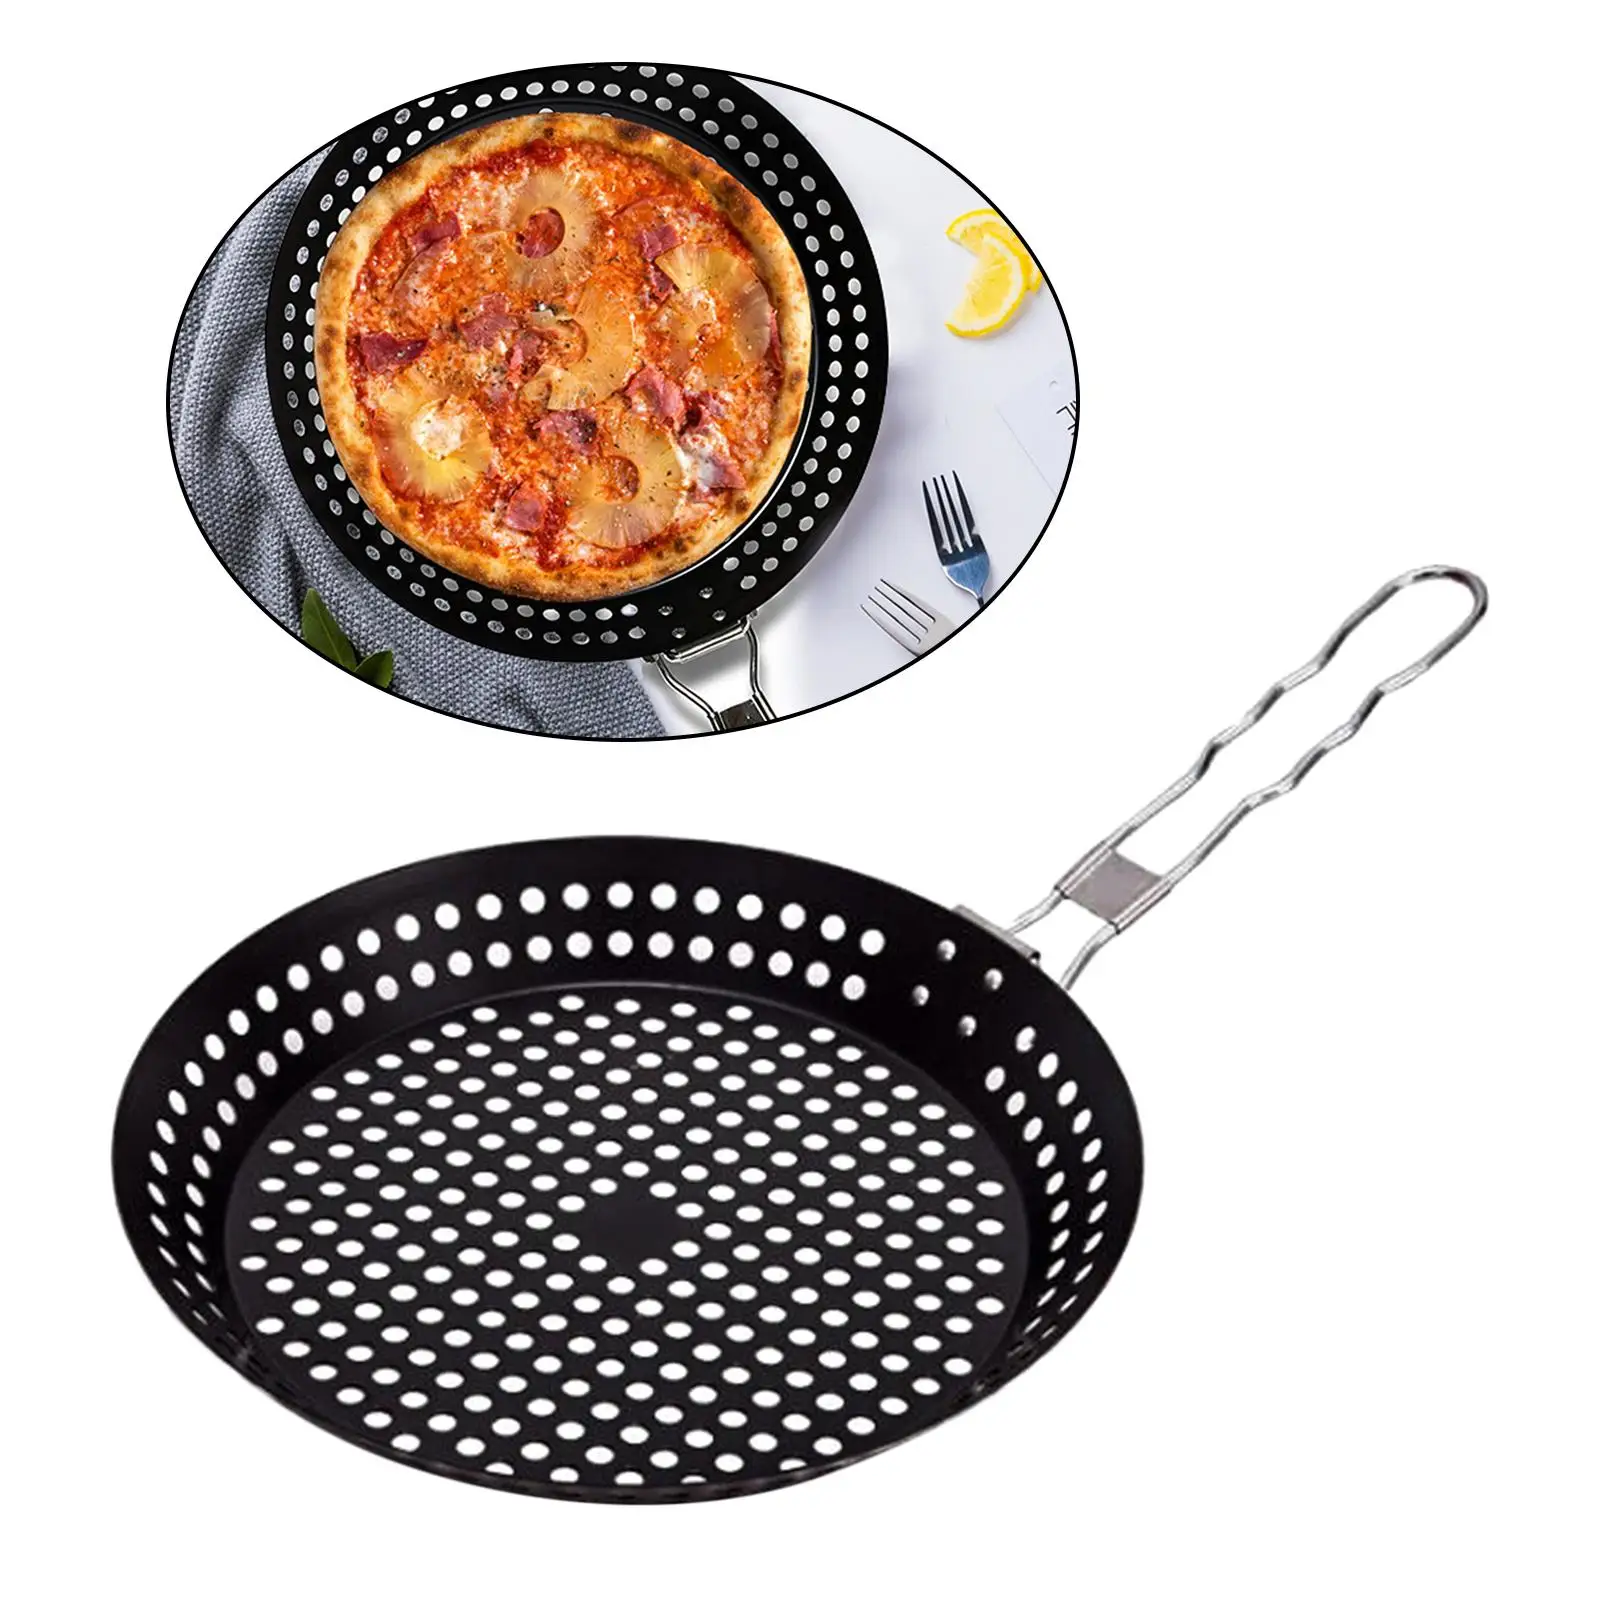 Portable Barbecue Basket Roasting Plate Barbecue Plate for Pizza Chicken Seafood